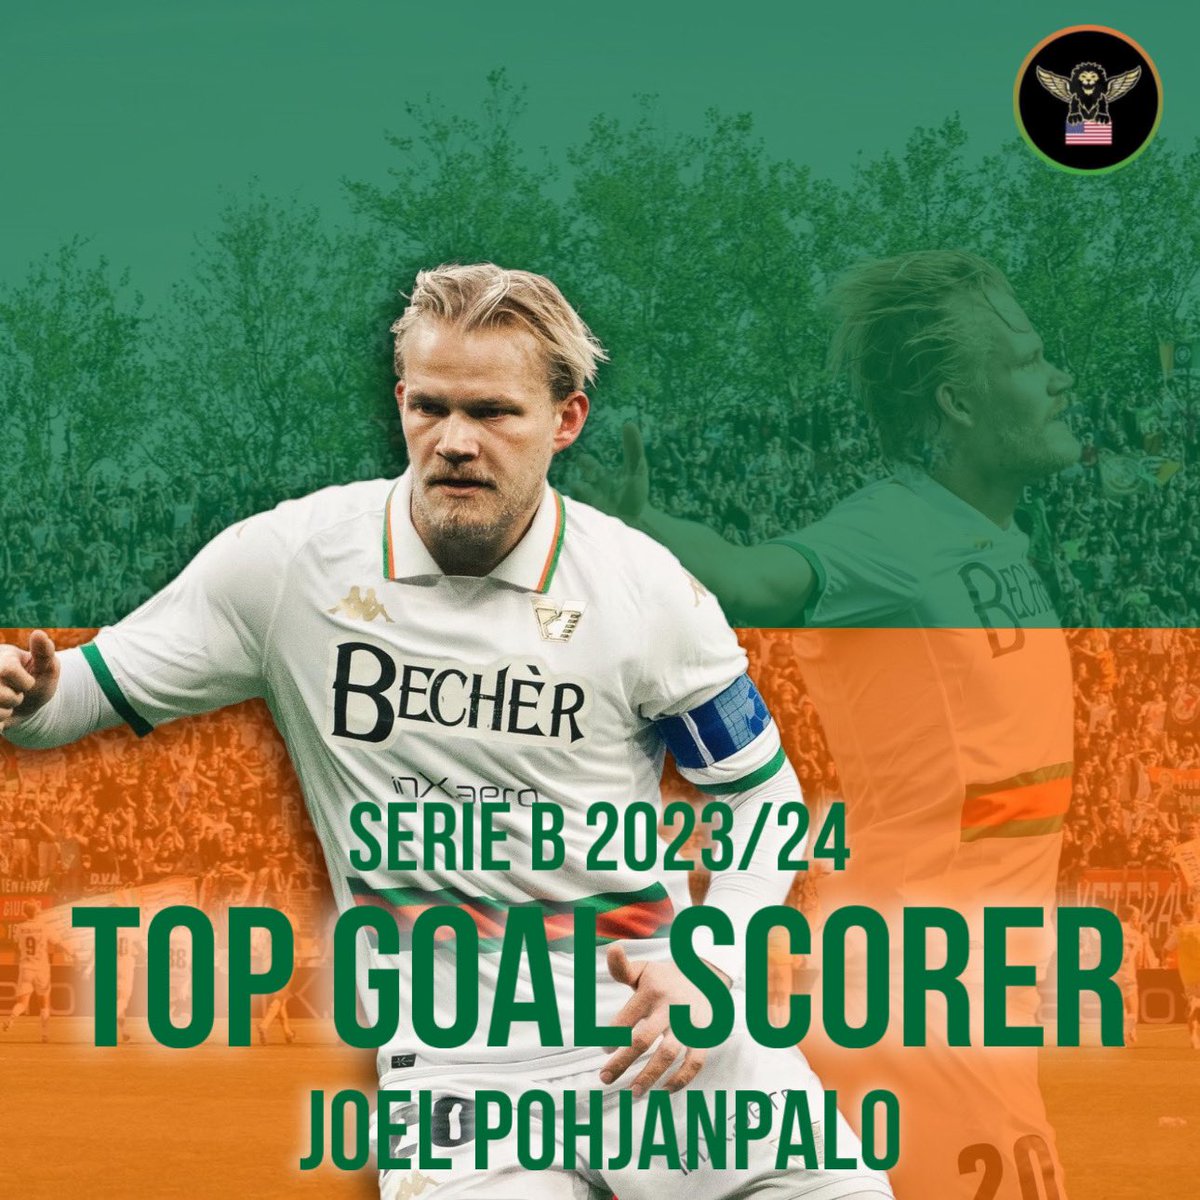 Congratulations to our bomber @jpohjanpalo finishing off the regular season with 22 goals. One of our best players all season. Let’s hope for more during playoffs! 🧡🖤💚🇫🇮

#joelpohjanpalo #veneziafc #arancioneroverde #serieb